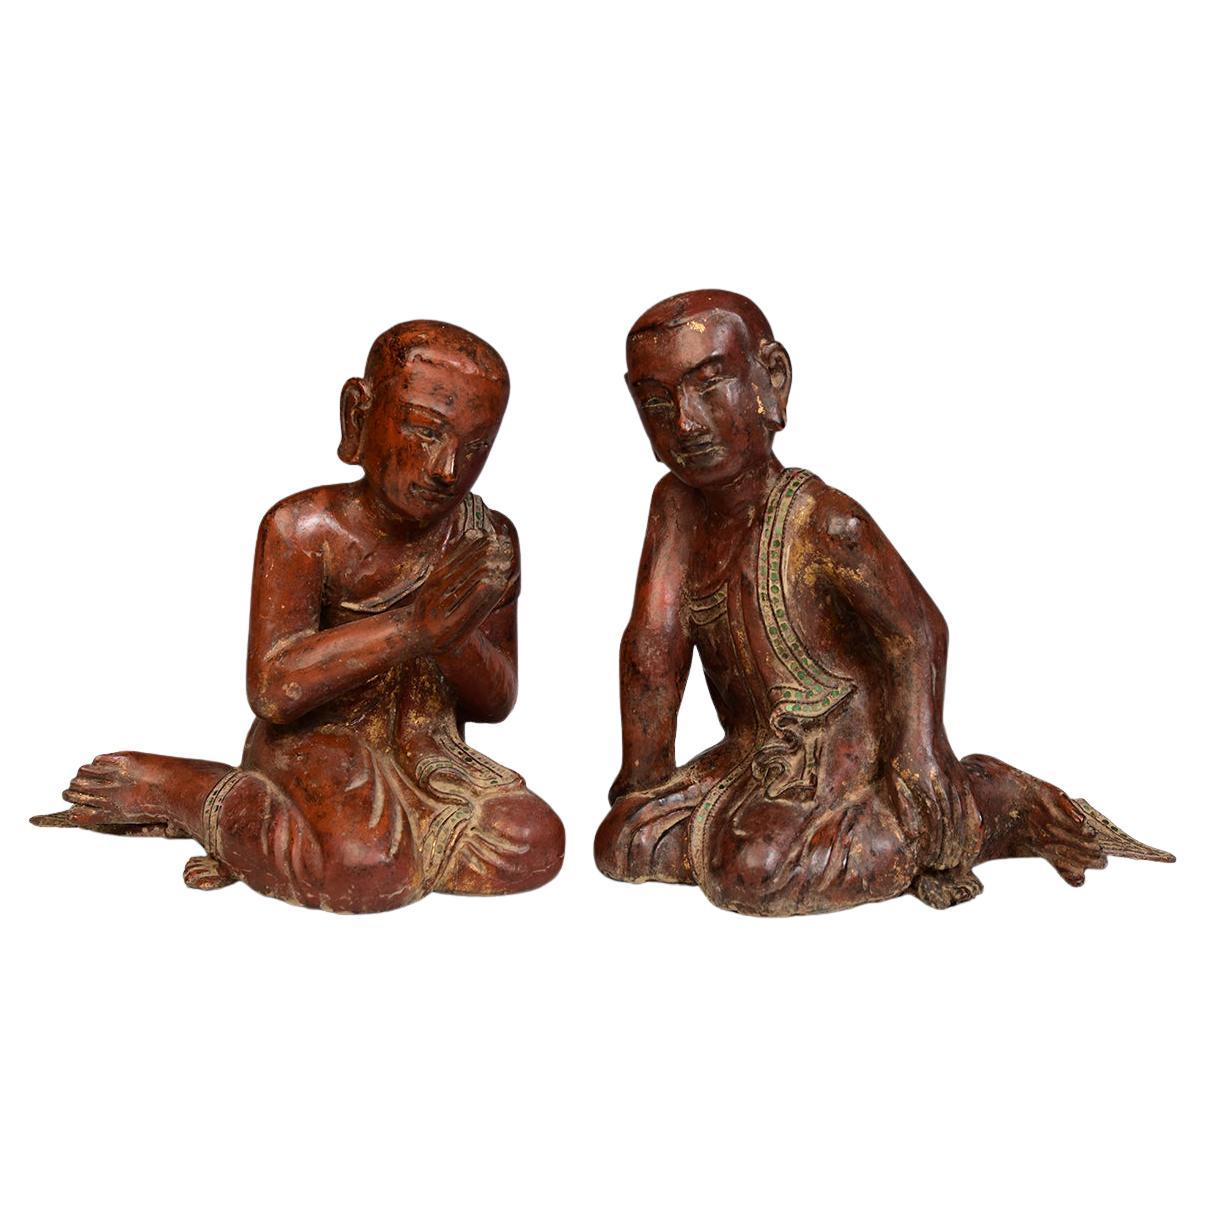 19th C., Mandalay, A Pair of Antique Burmese Wooden Seated Monks / Disciples For Sale